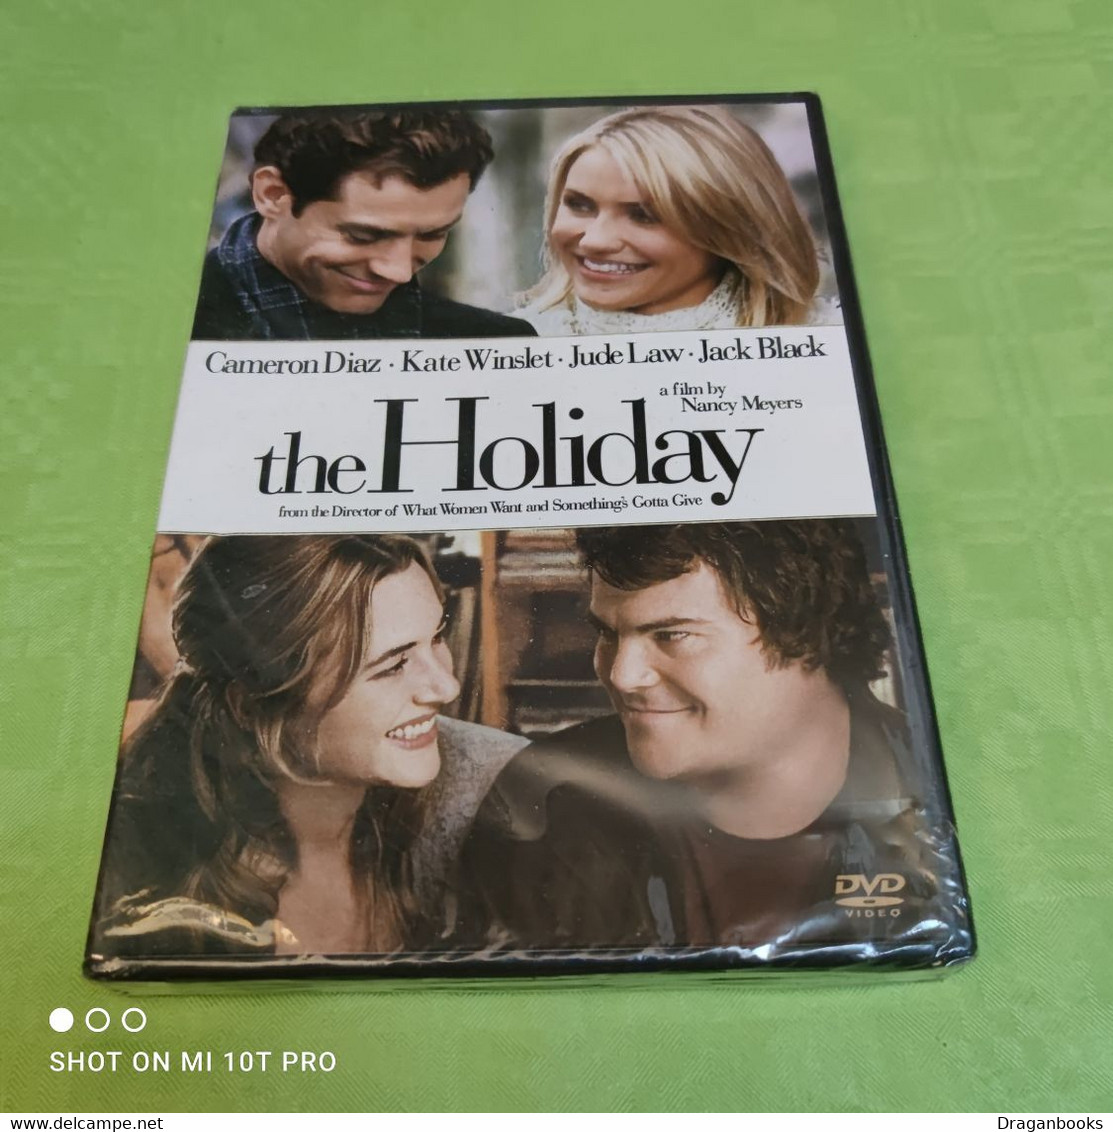 The Holiday - Romantic